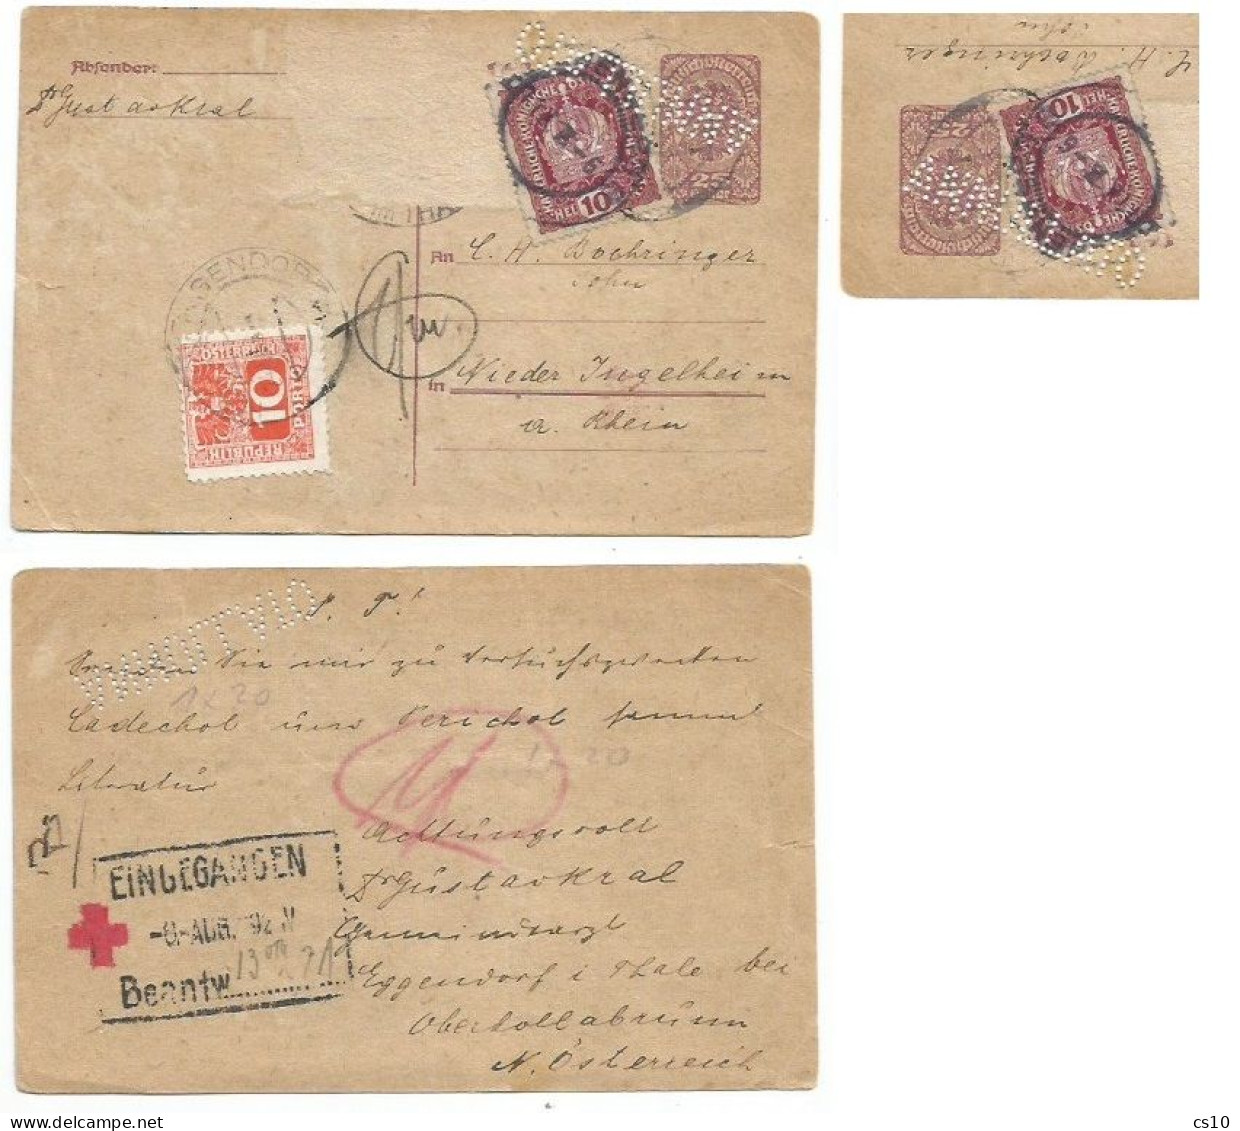 Austria PSC H.25 + H.10 Sent 1oct1918 (1 Stamp Missed) Taxed P.Due H.10 With Perforation "ANNULLATO" .....???? - Cartas & Documentos